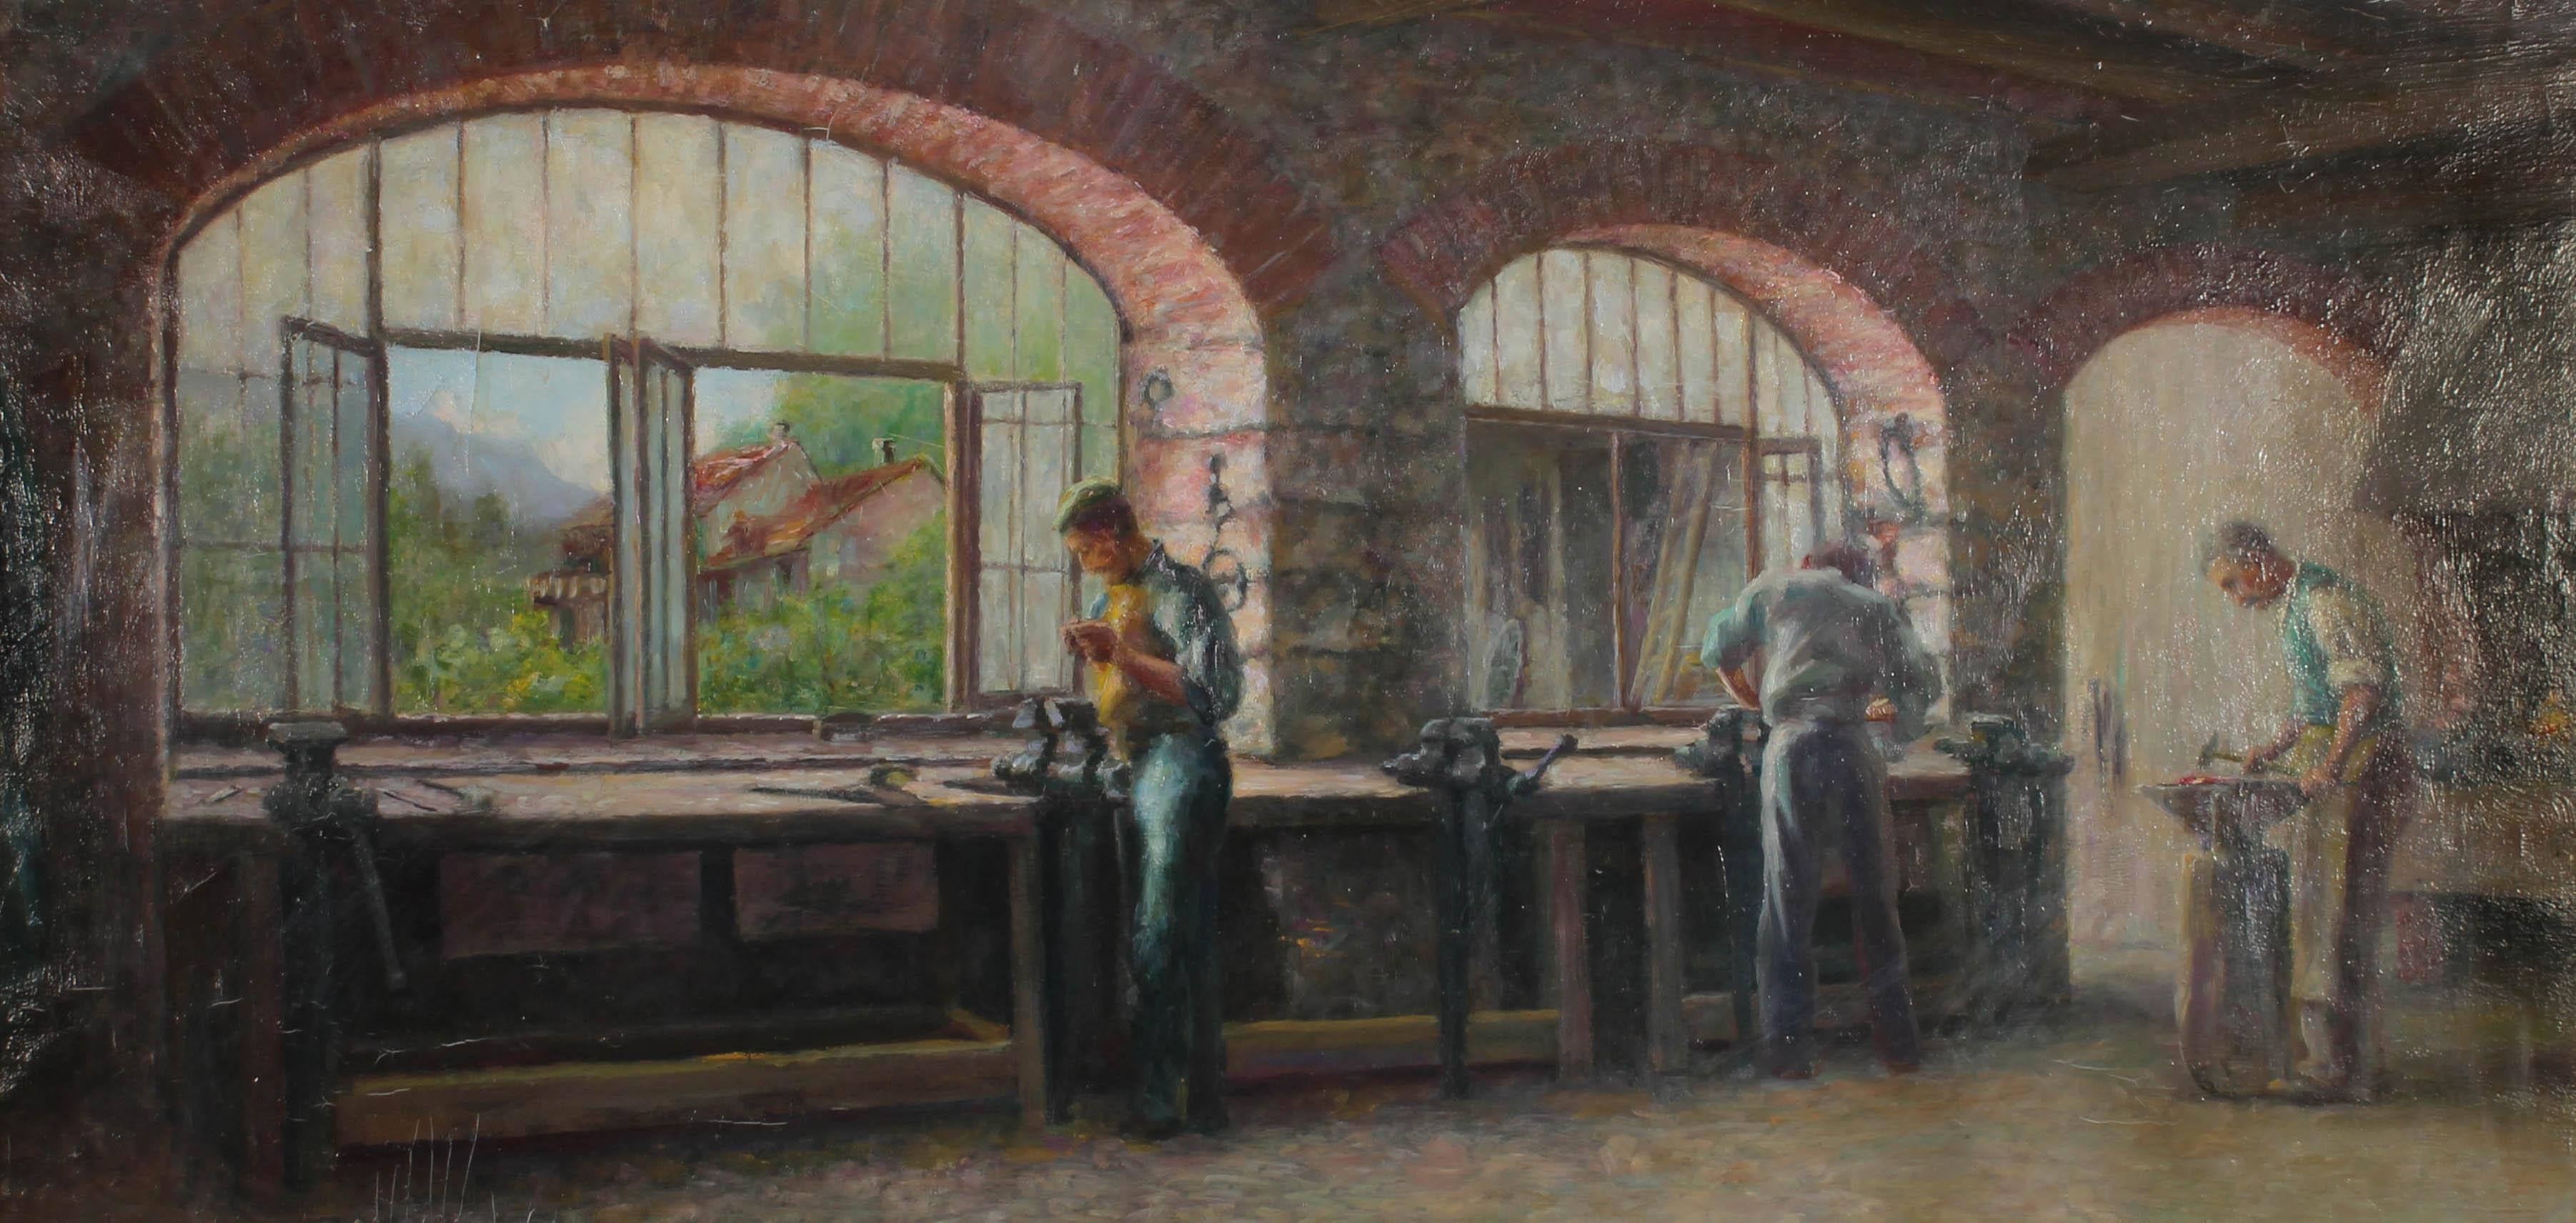 A fine early Century oil interior scene showing a blacksmith's workshop, with three men working at their stations with large, arched windows flooding the space with natural light and the greenery of the outside adding colour to the muted scene. The